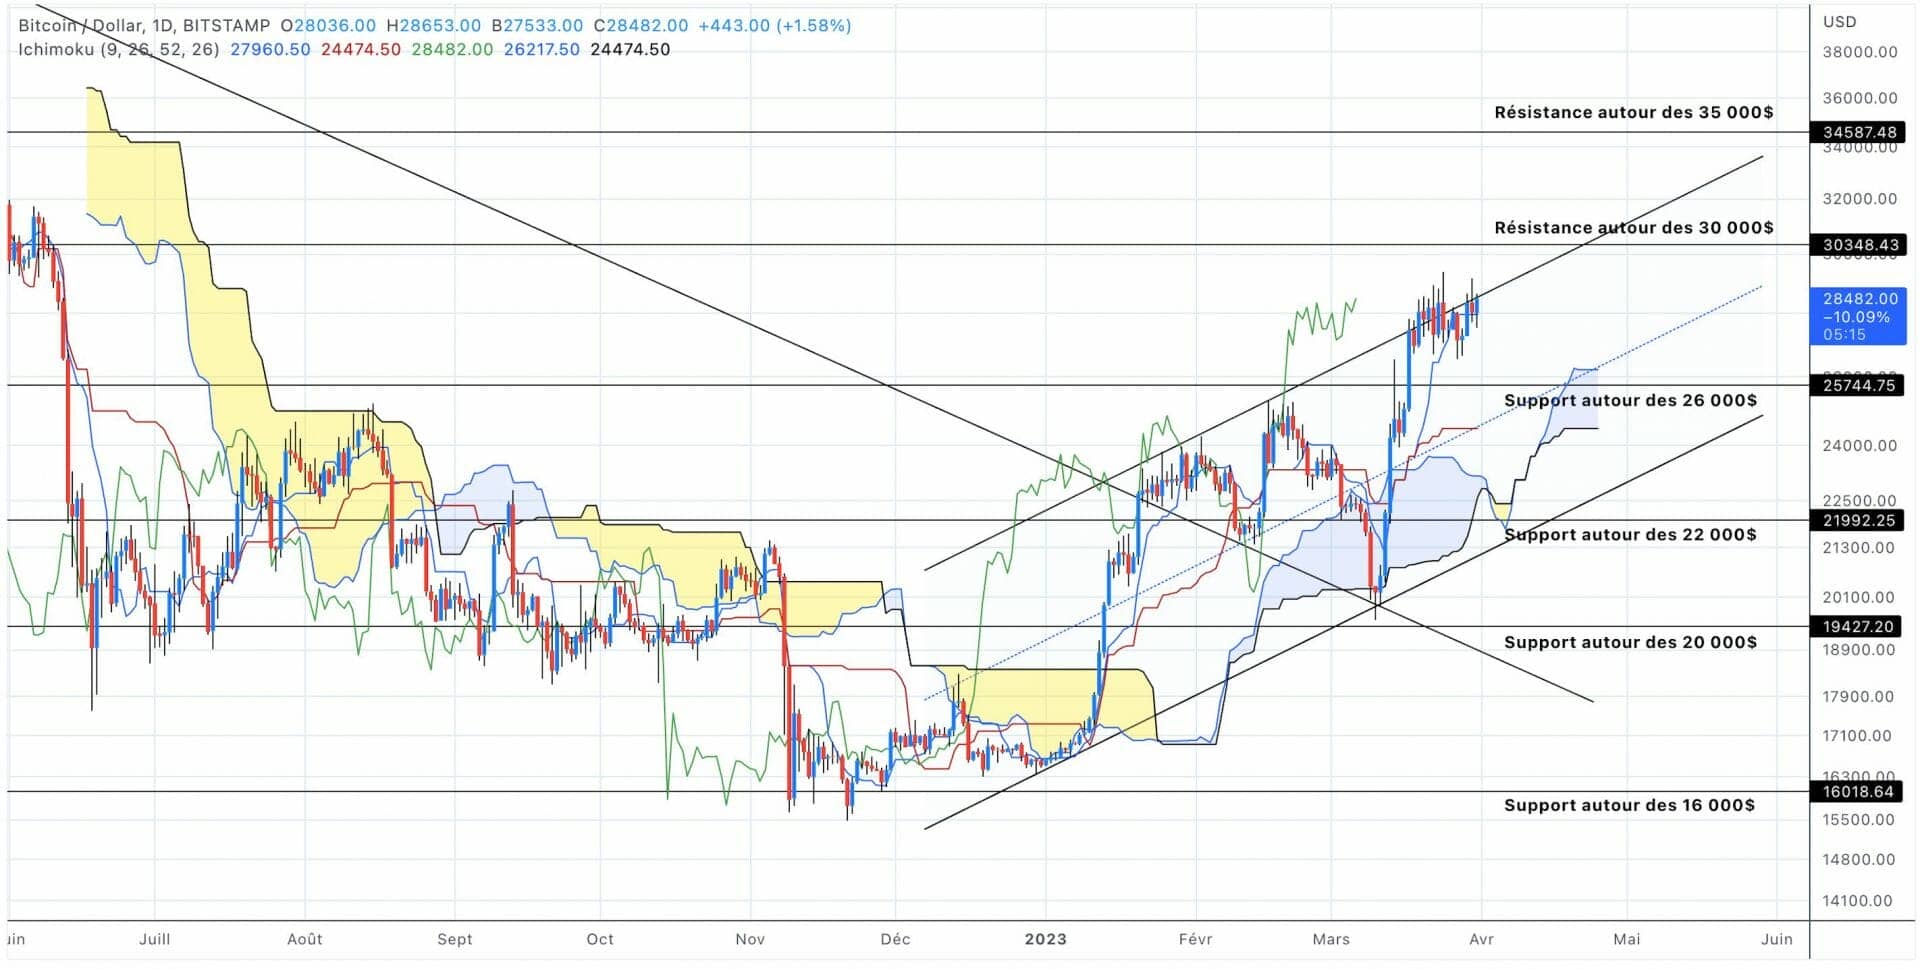 Bitcoin price analysis in daily units - April 01, 2023